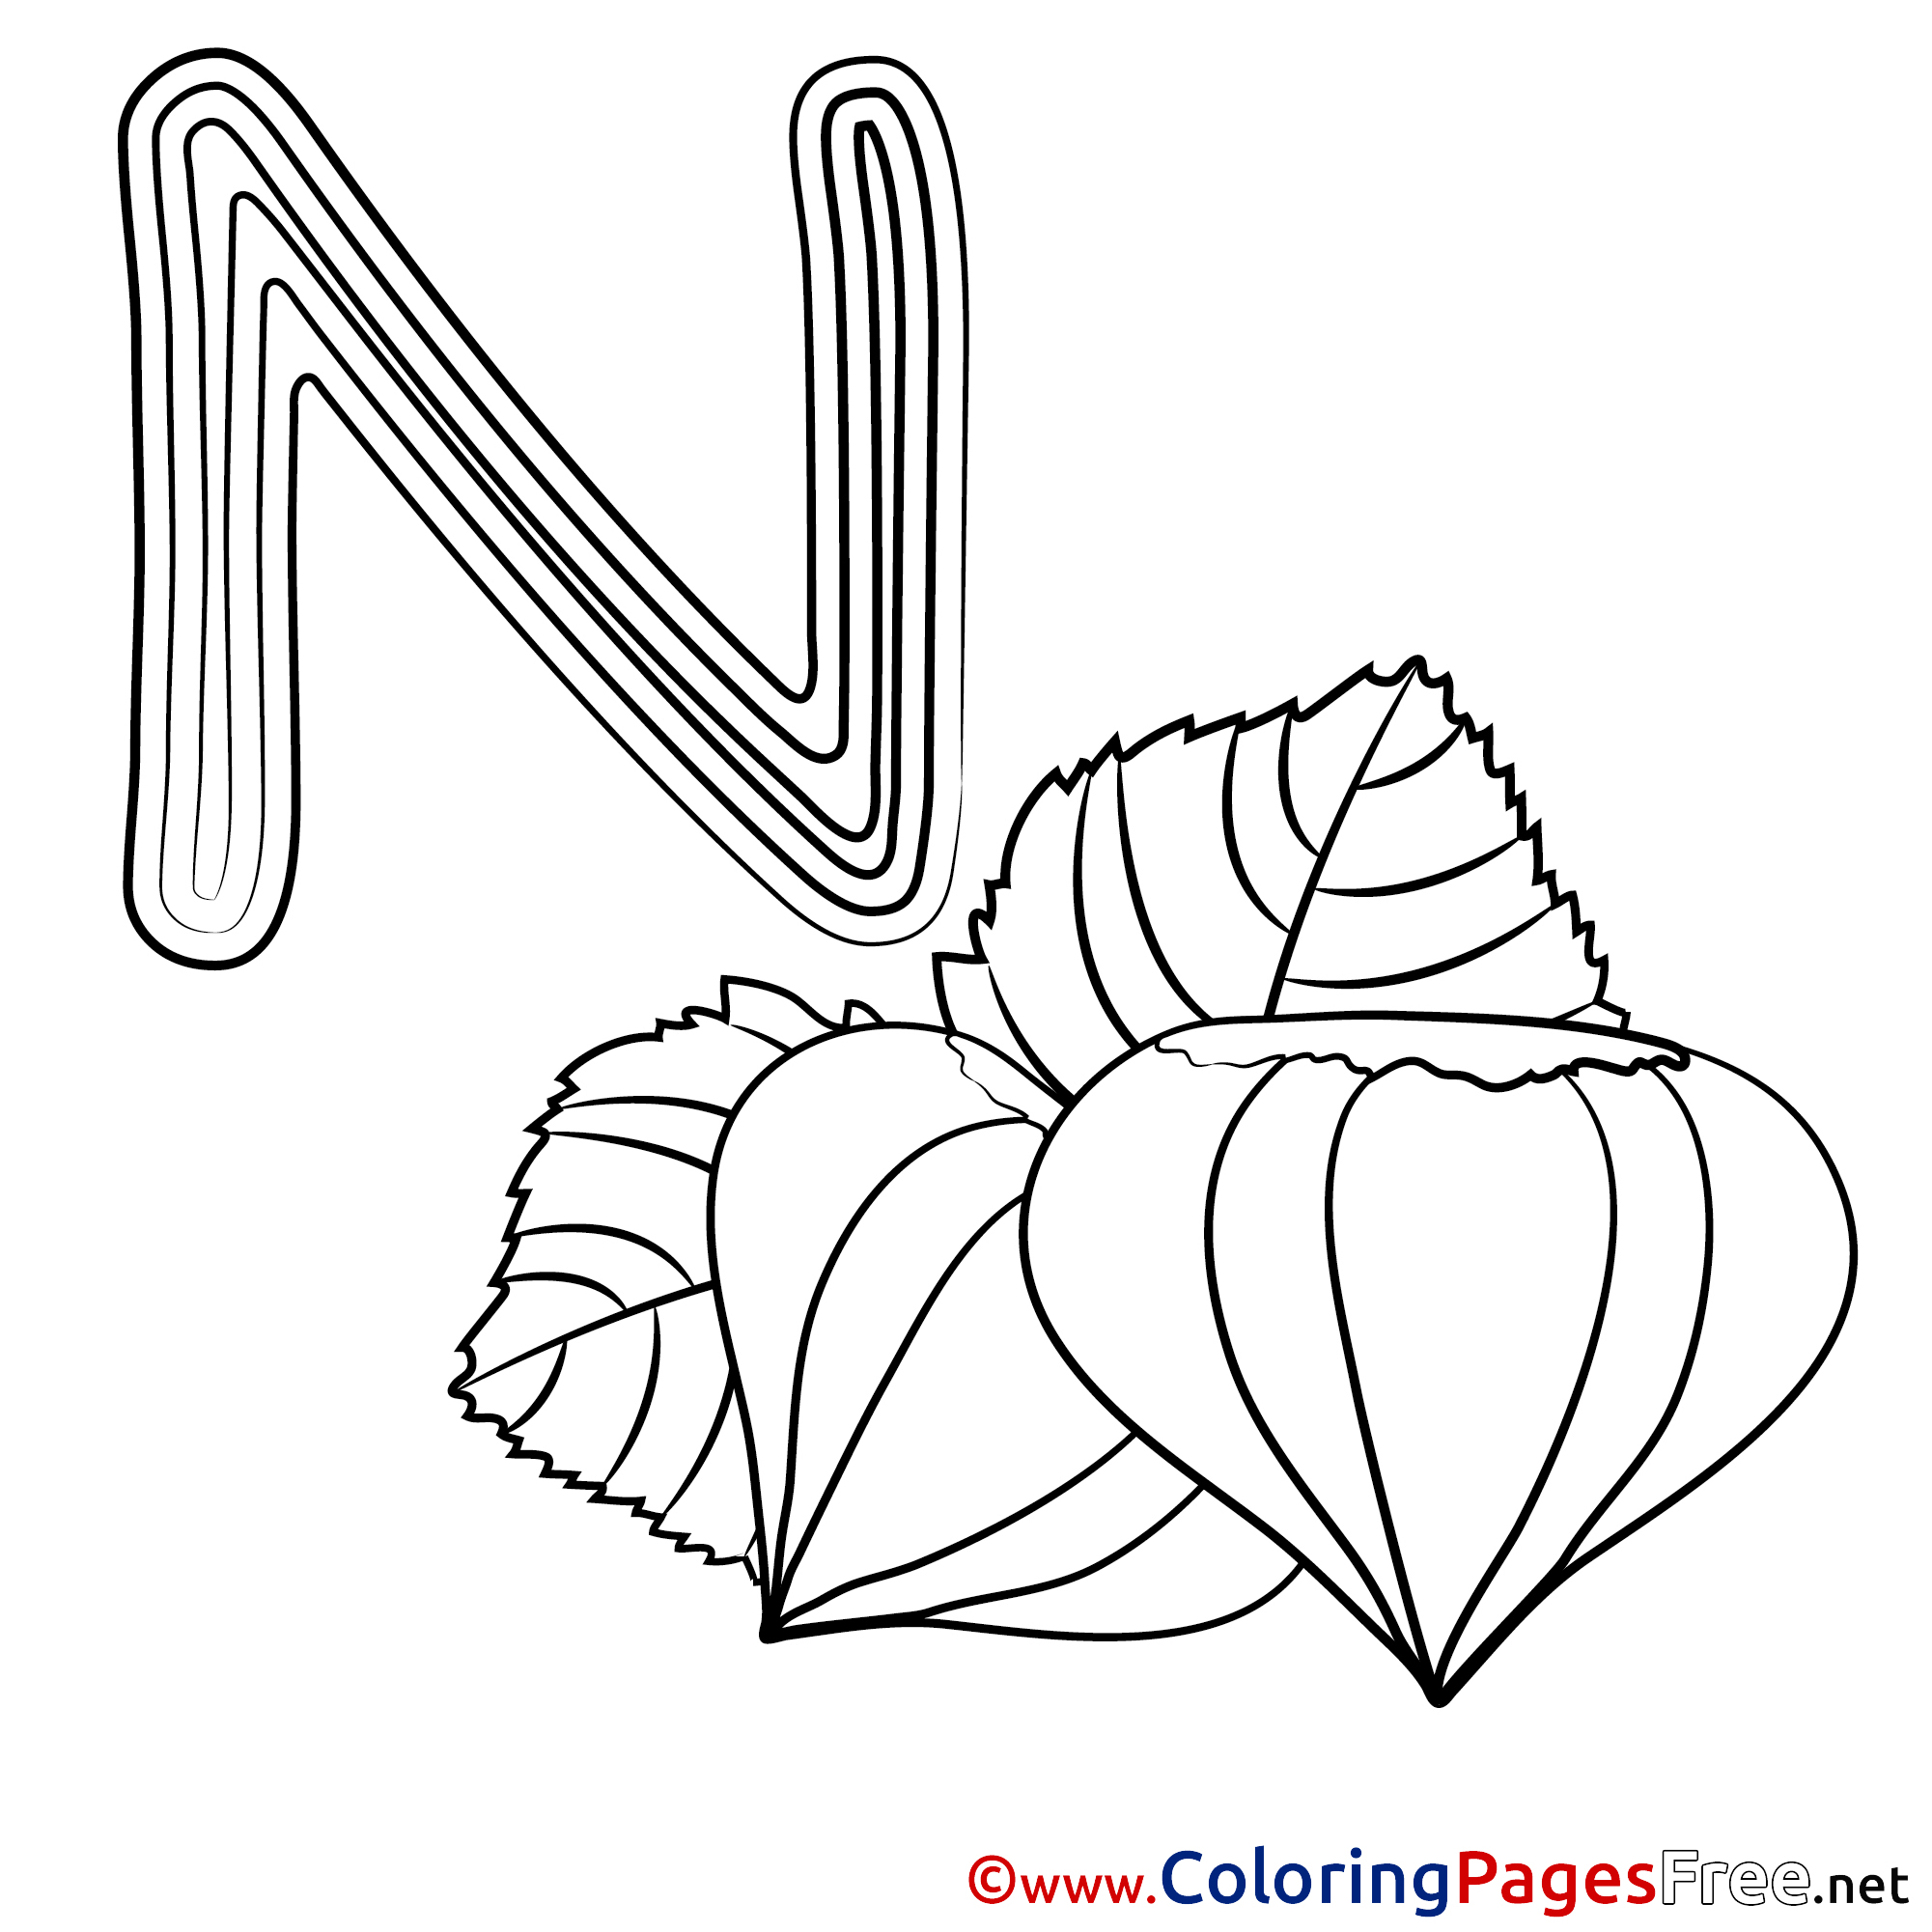 Nut printable Coloring Pages Alphabet